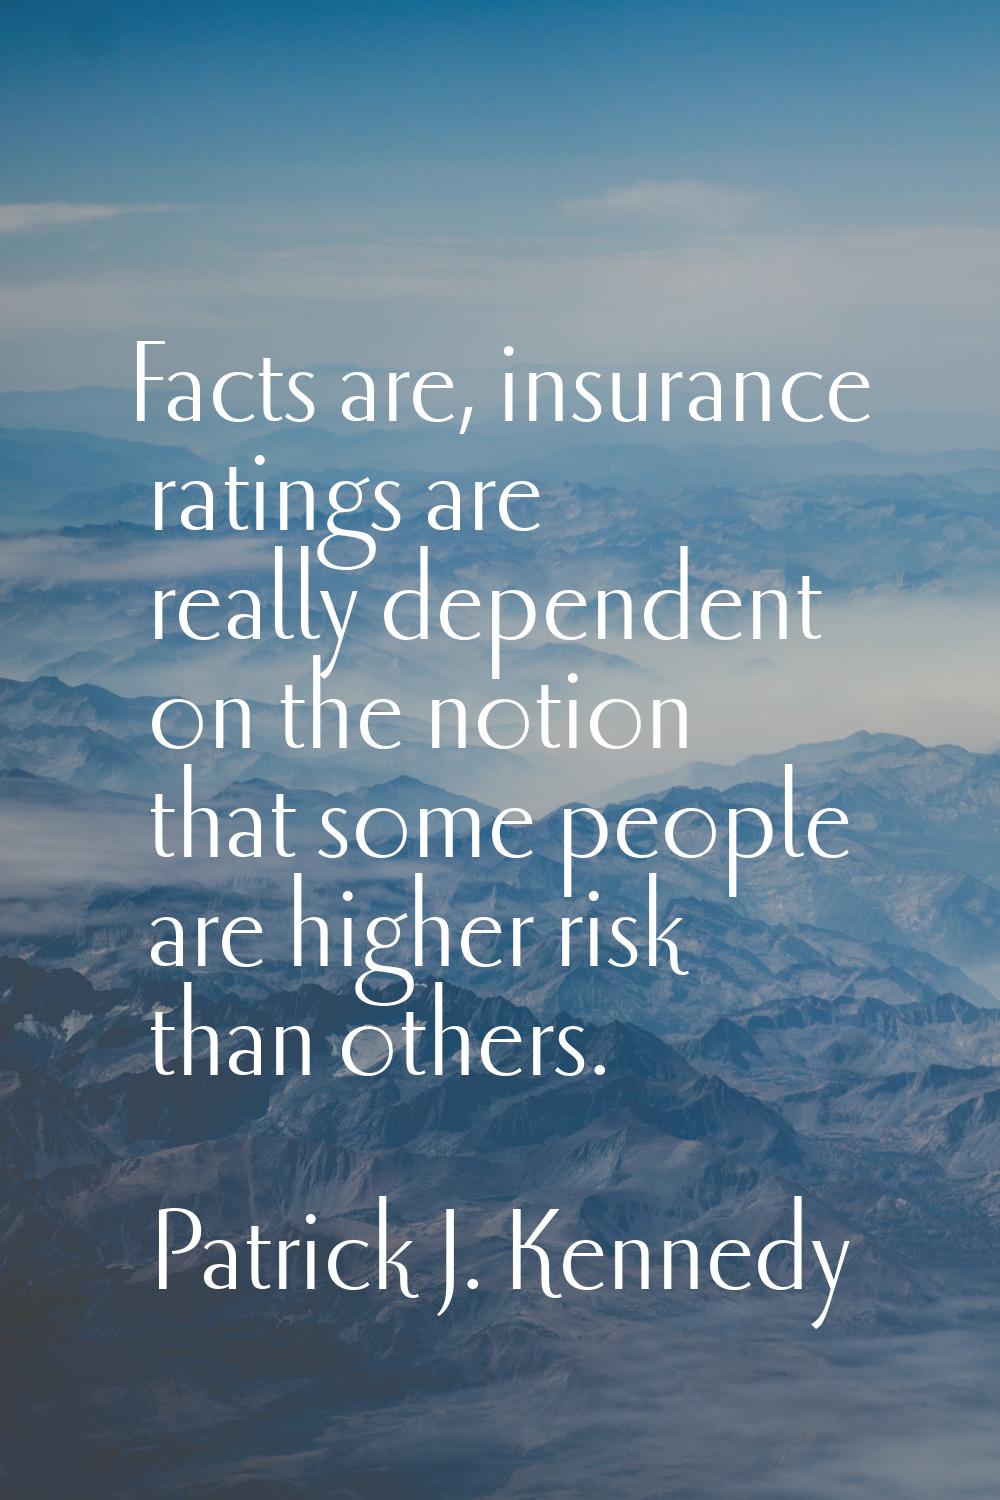 Facts are, insurance ratings are really dependent on the notion that some people are higher risk th